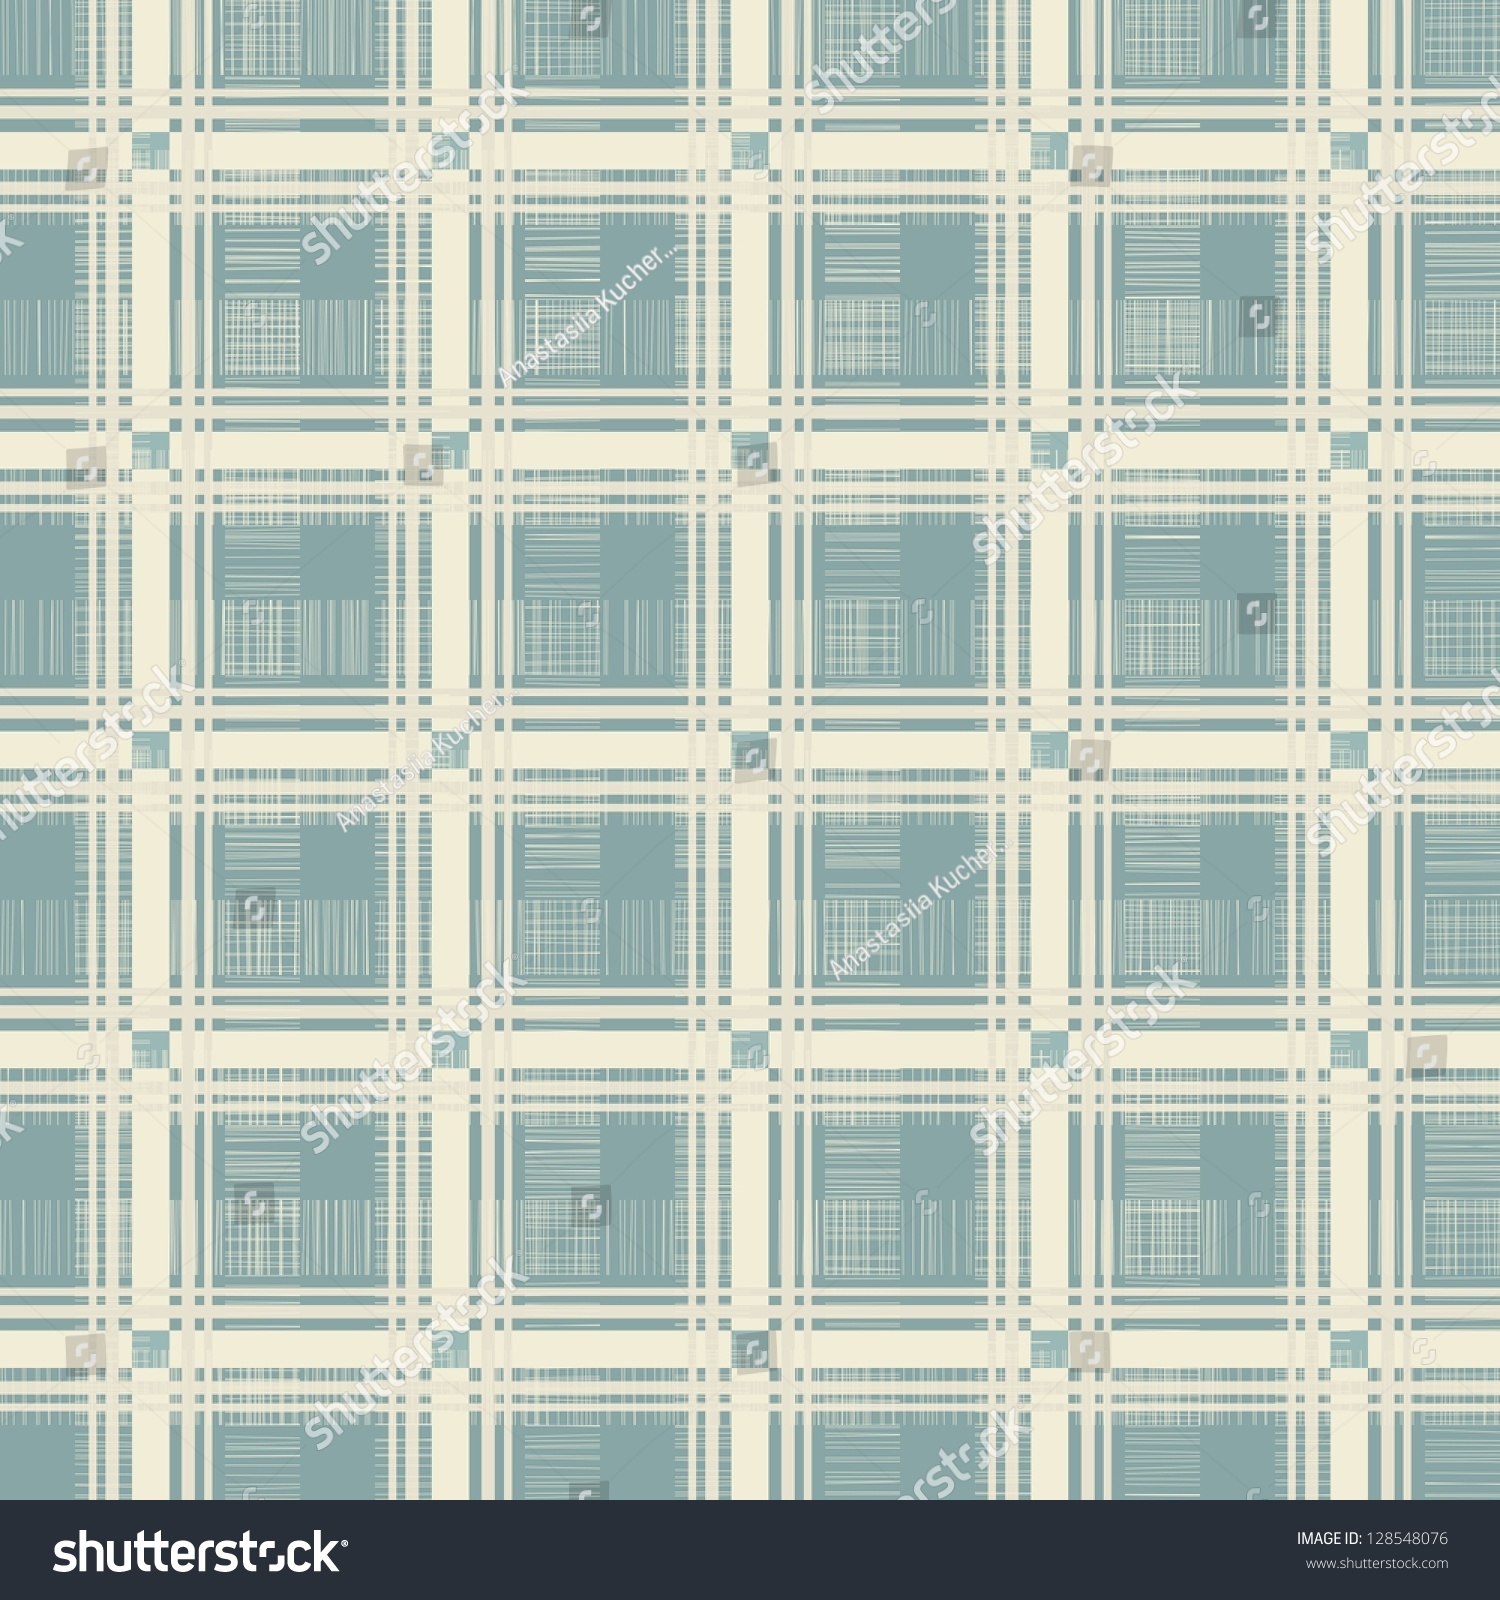 Retro Geometric Seamless Pattern In Blue, And Grey Stock Vector 